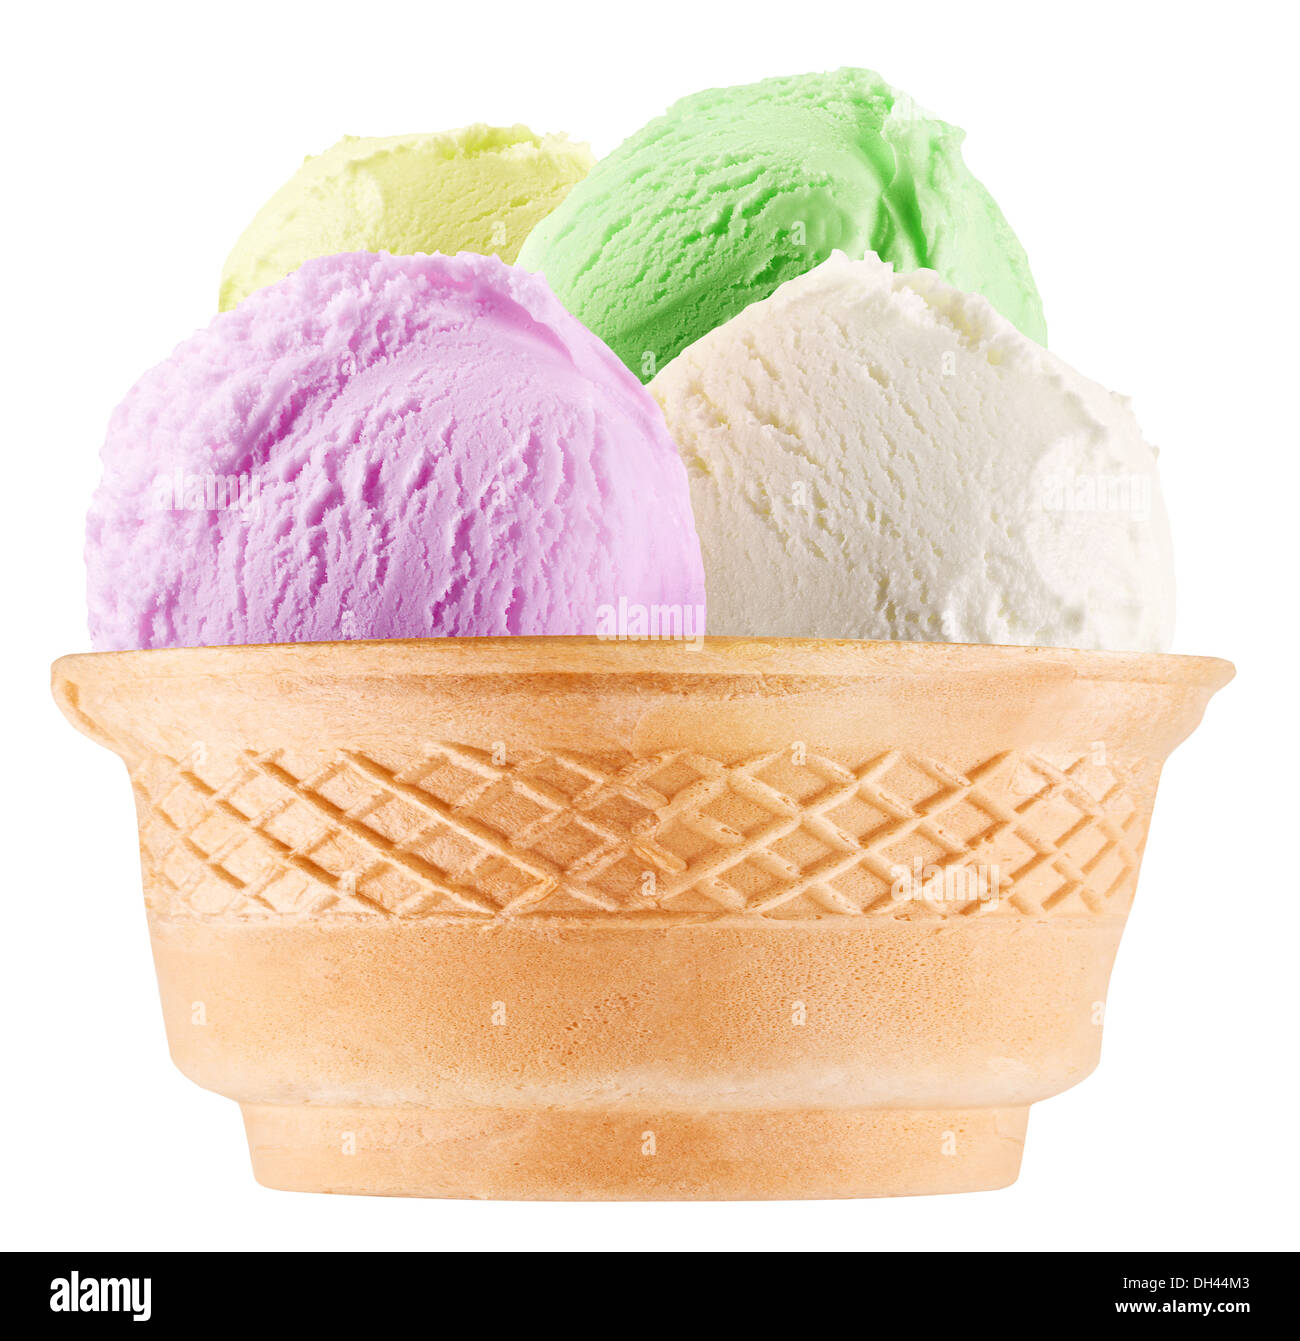 Ice-cream scoops in waffle cup. File contains clipping paths. Stock Photo